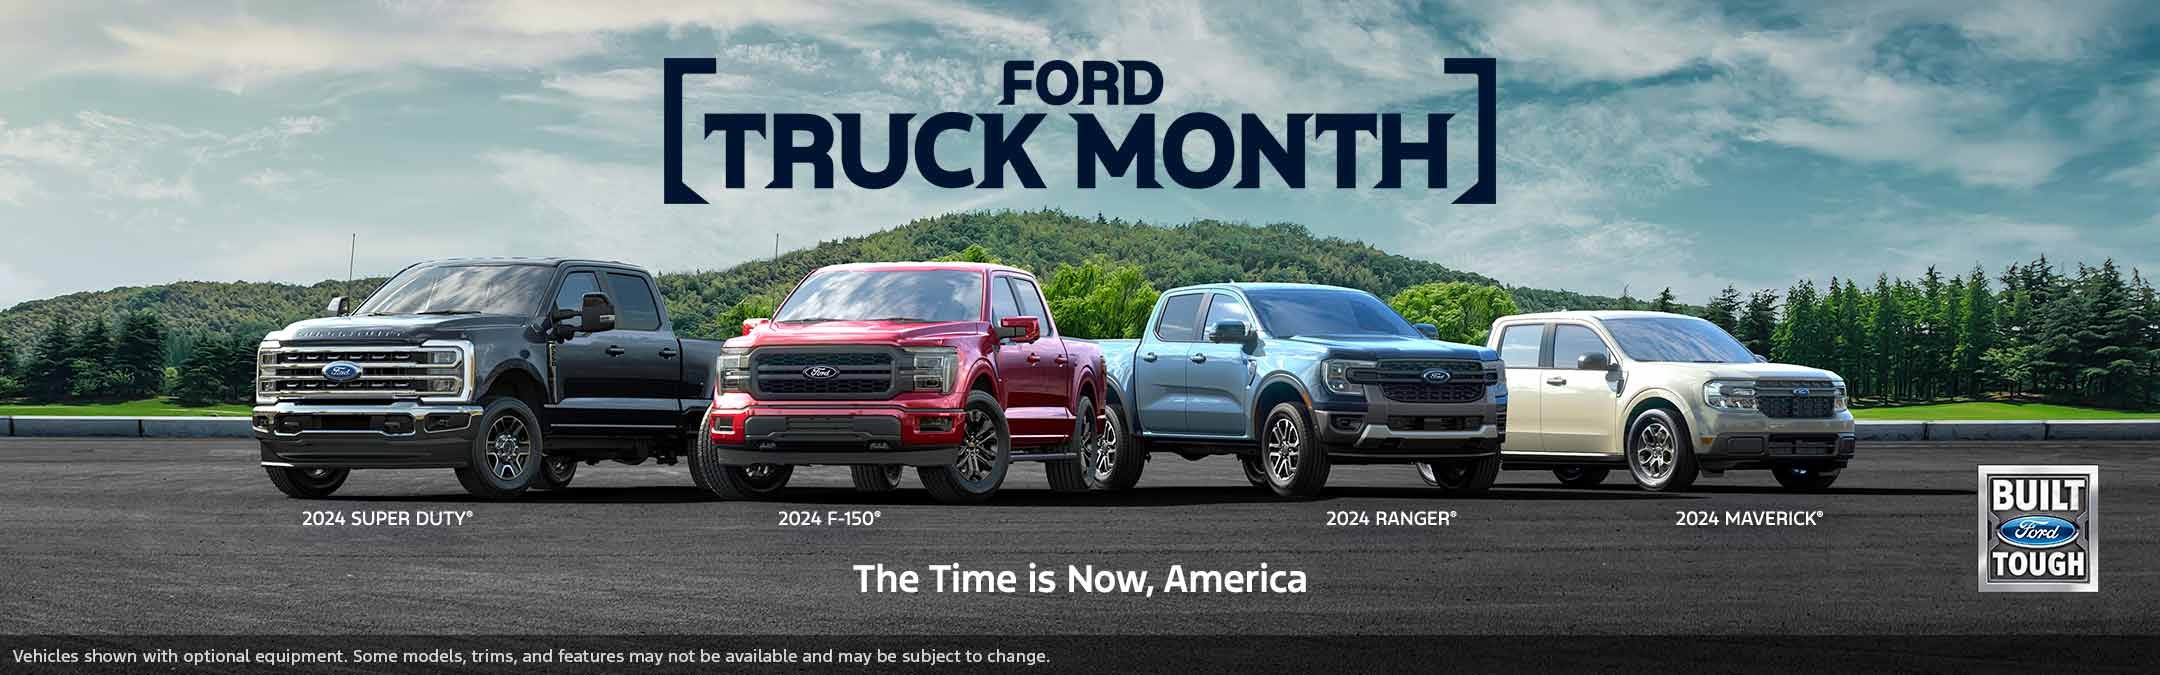 FORD TRUCK MONTH